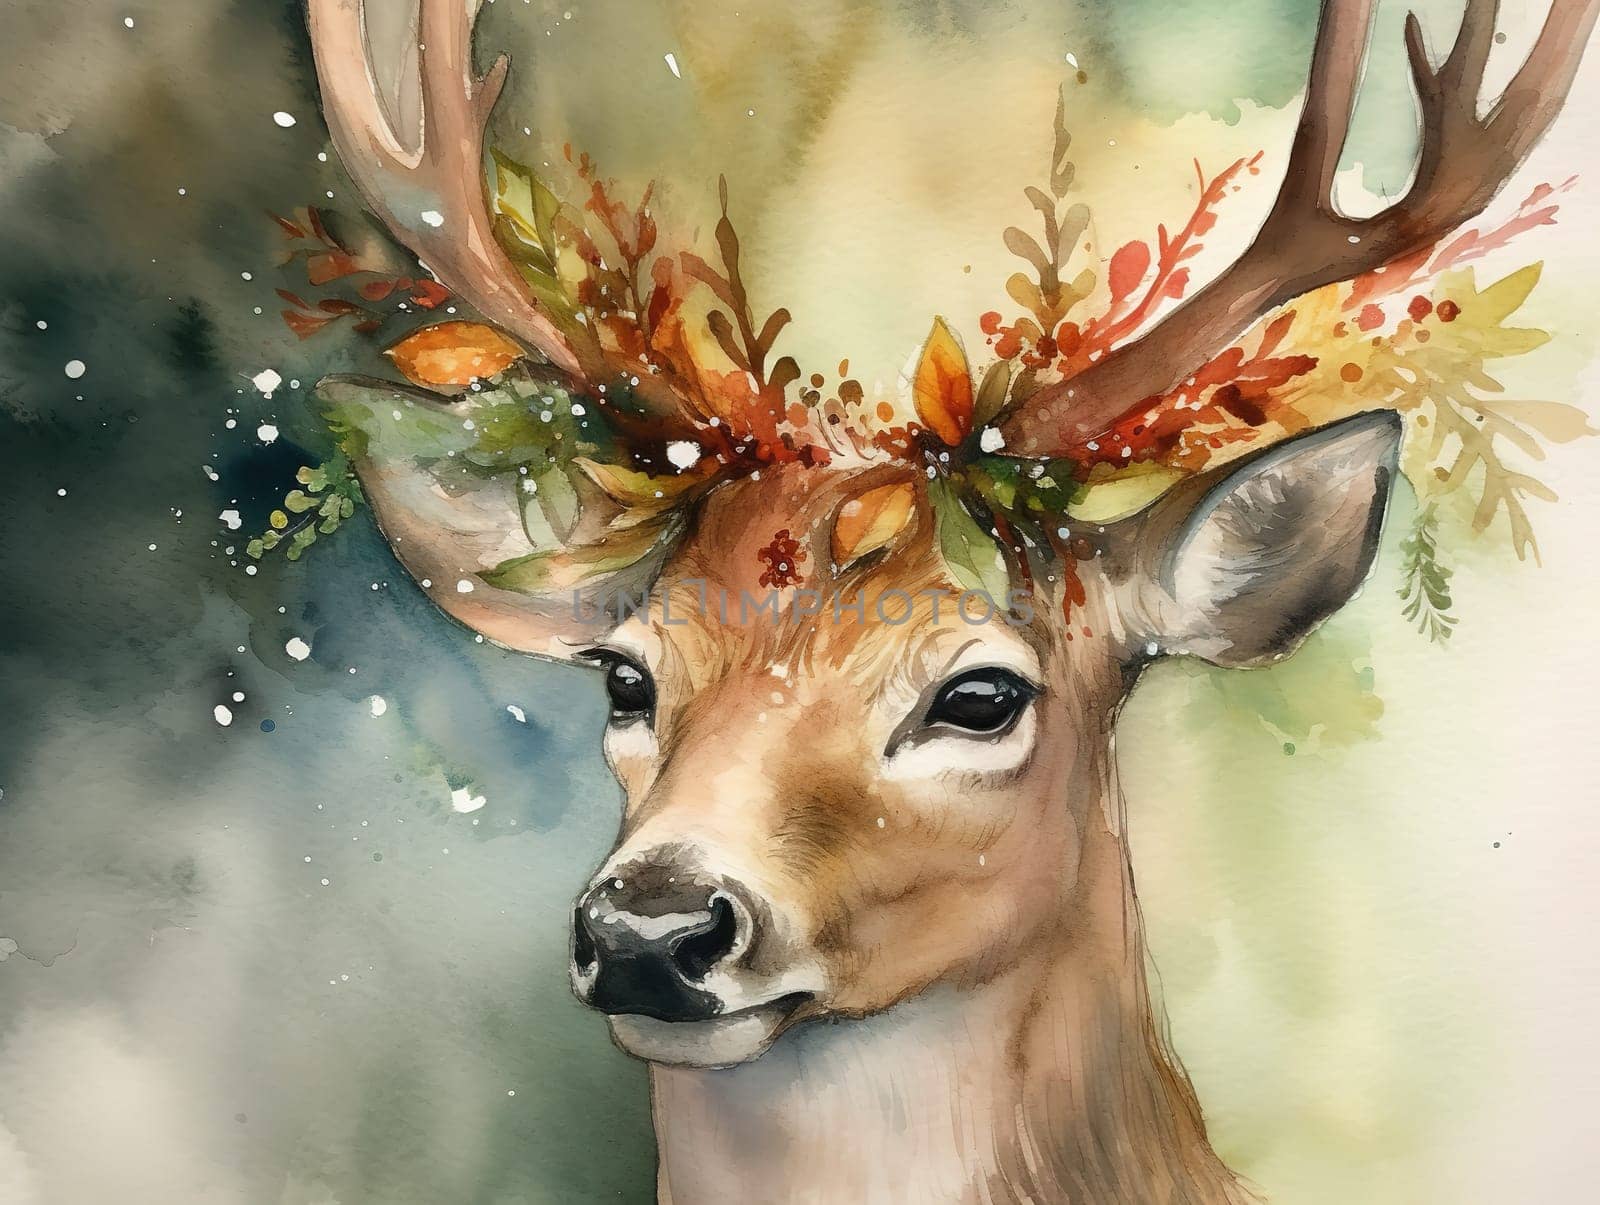 Christmas Deer Is Beautifully Captured In This Watercolor Illustration Portrait